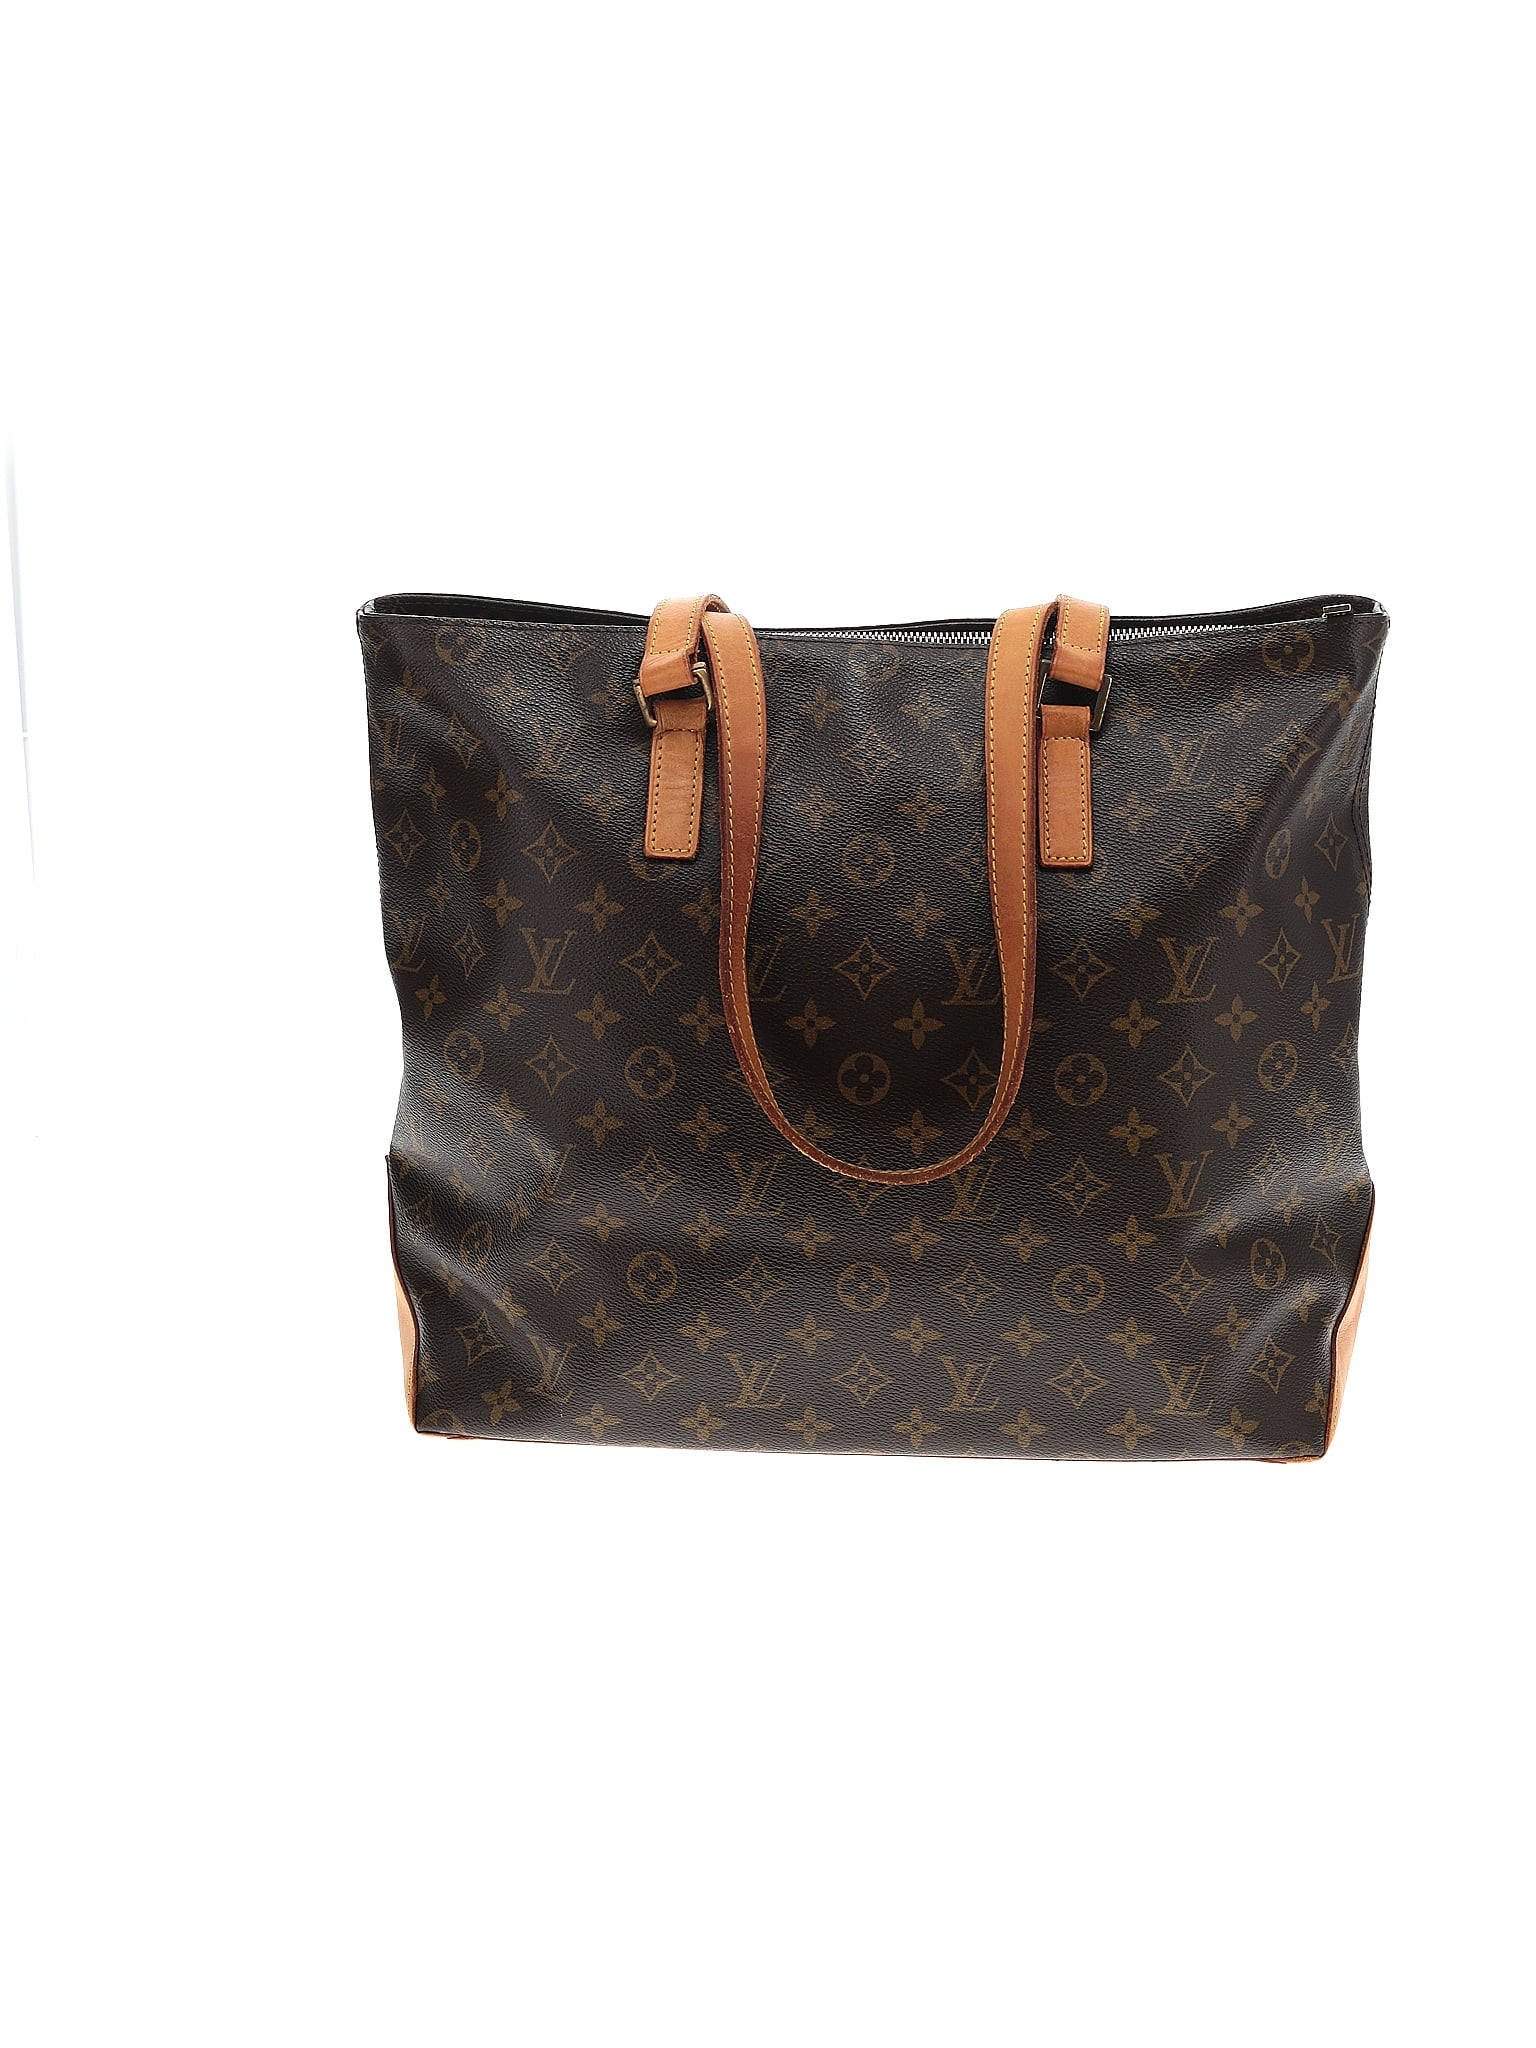 Lot - Louis Vuitton 'Marly' Epi Leather Tote Bag